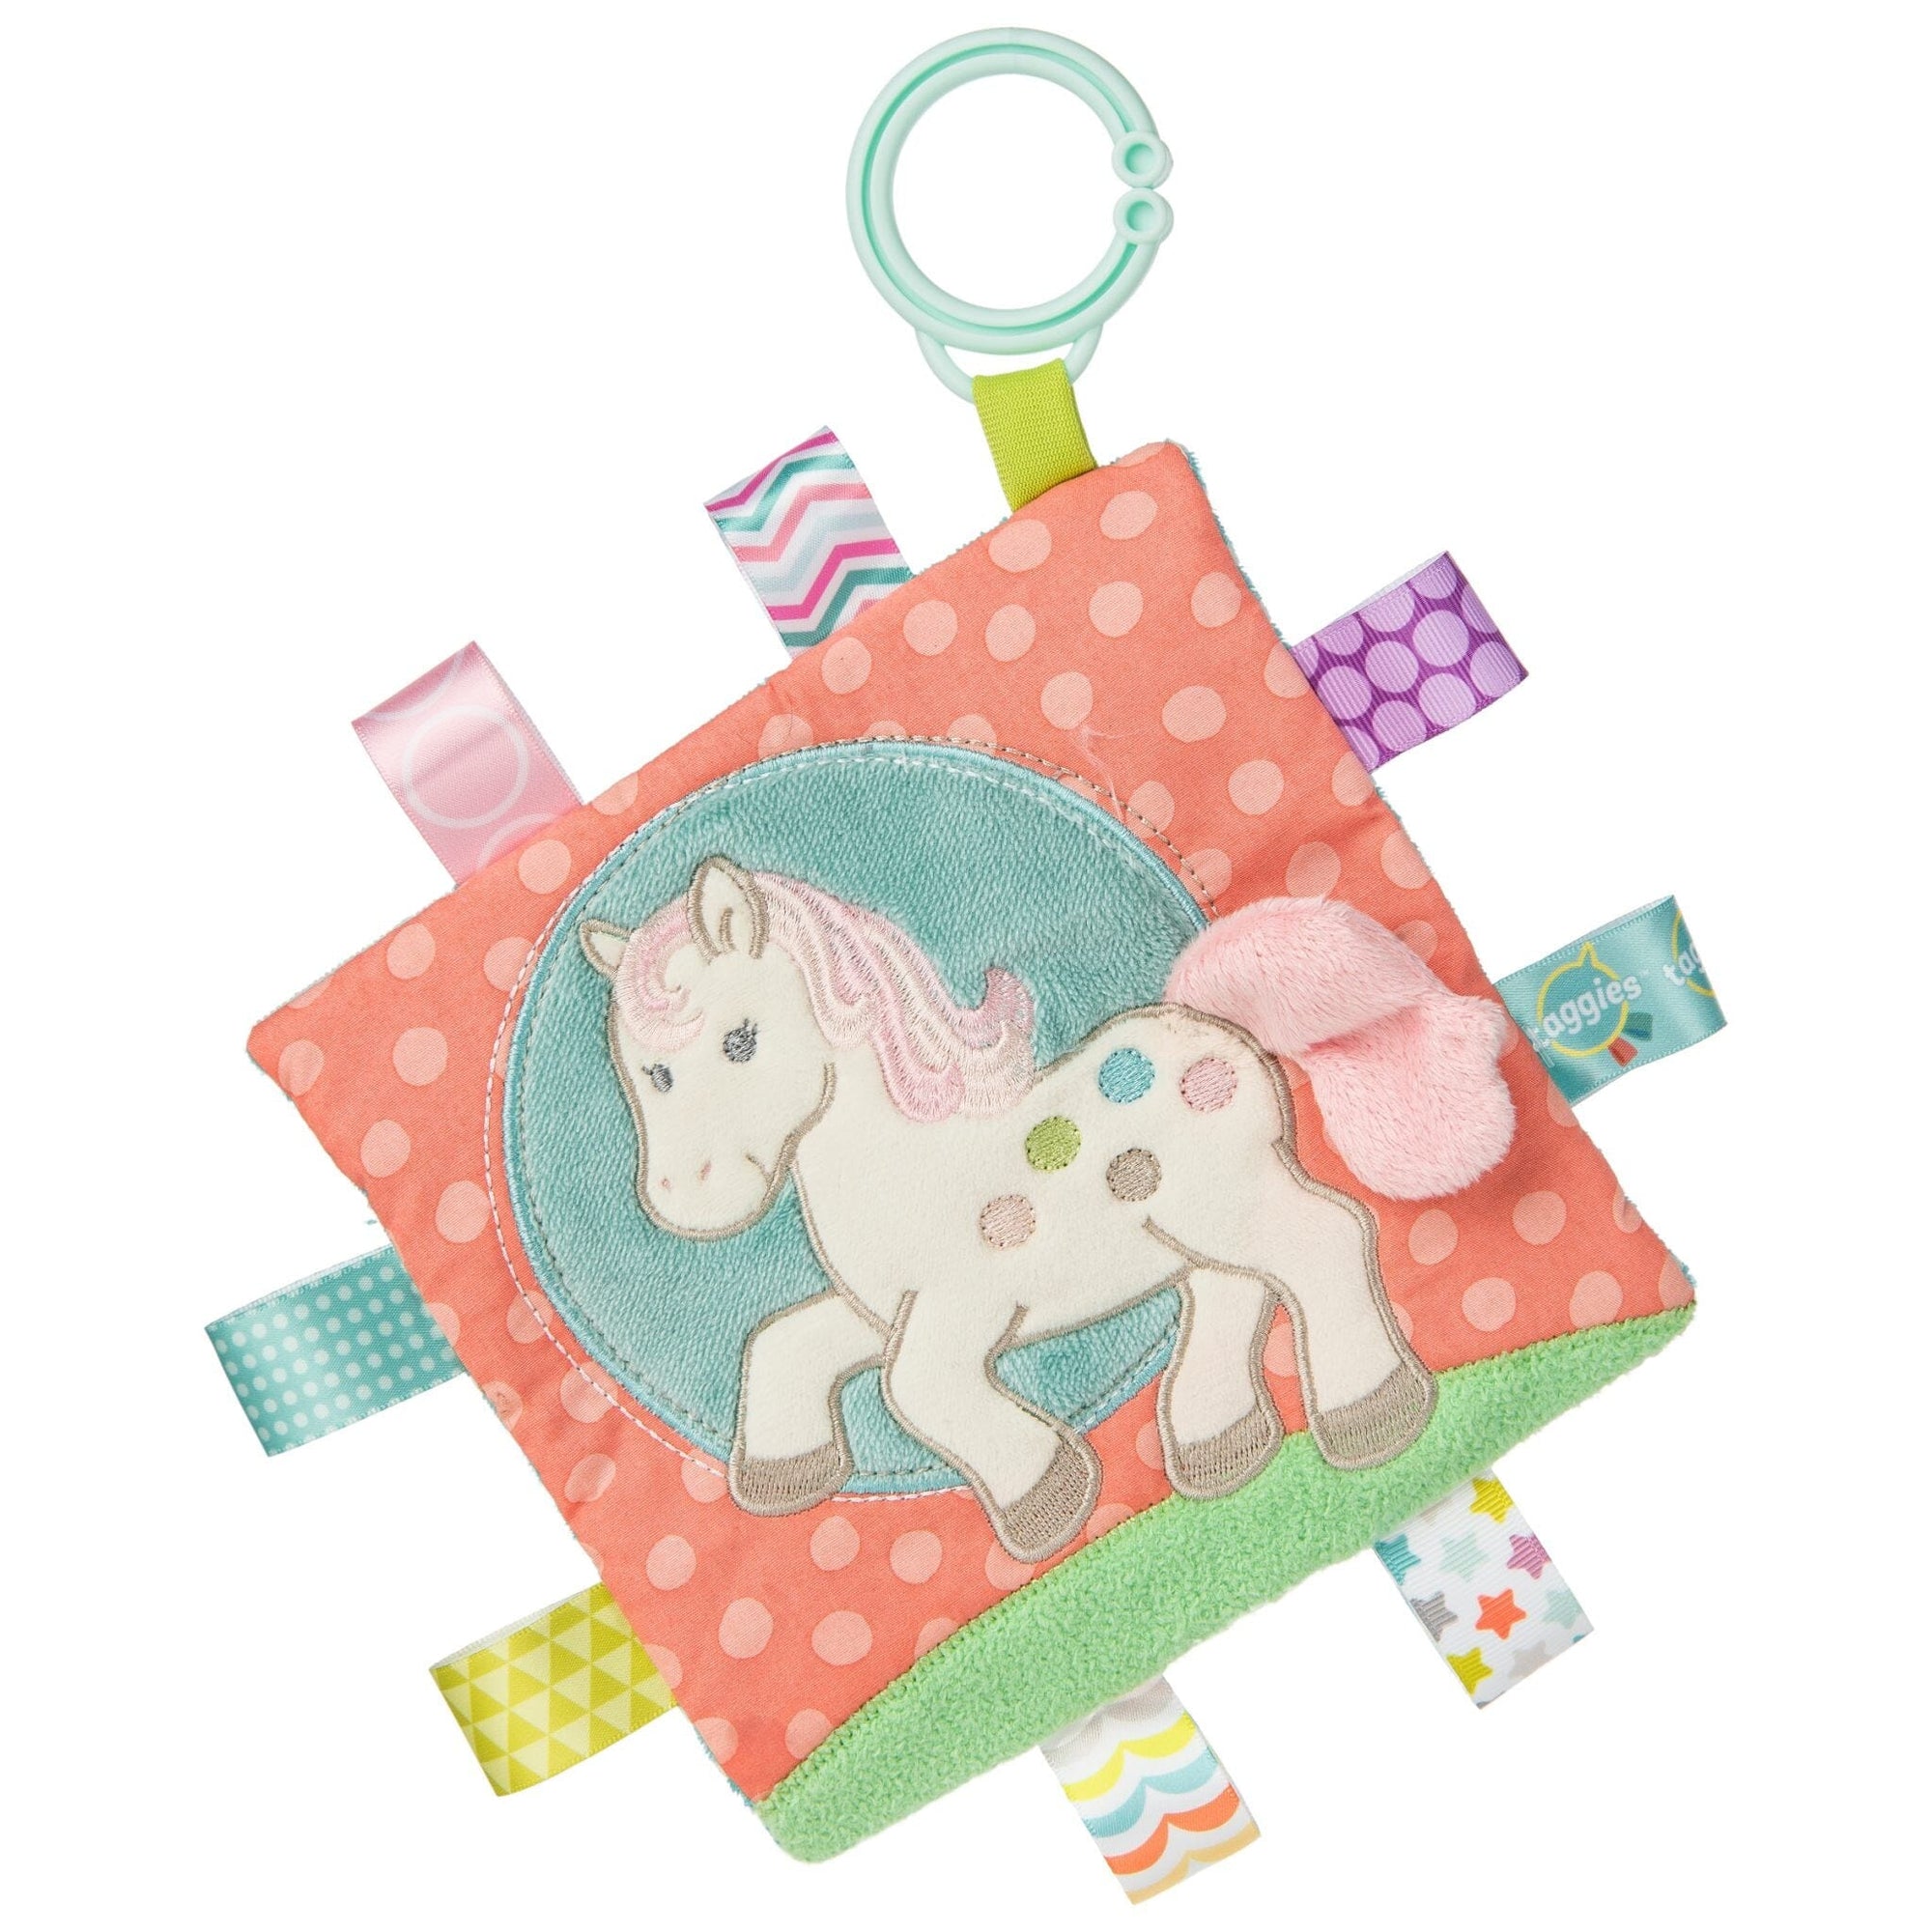 Mary Meyer Taggies Crinkle Me: Painted Pony